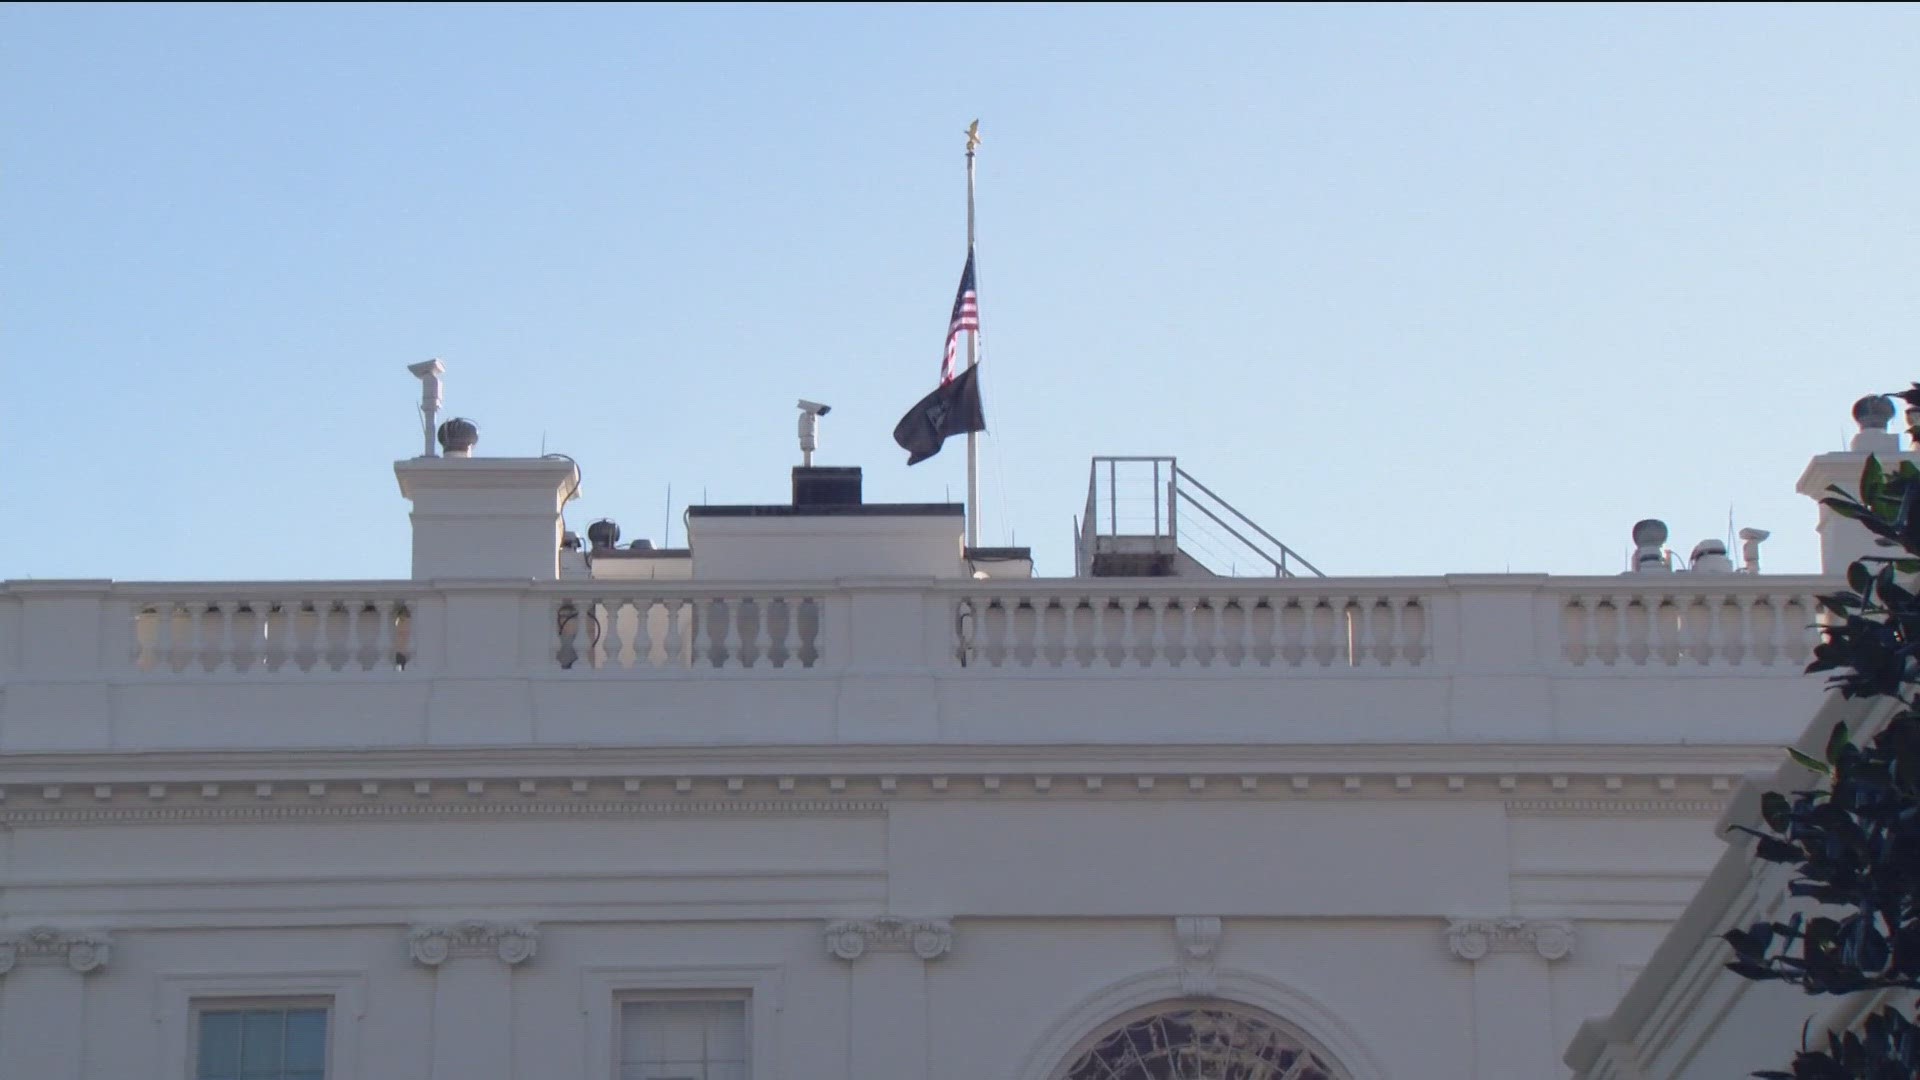 President Biden has ordered the lowering of flags to half-staff immediately as a mark of respect for the victims of the acts of violence perpetrated in Maine.